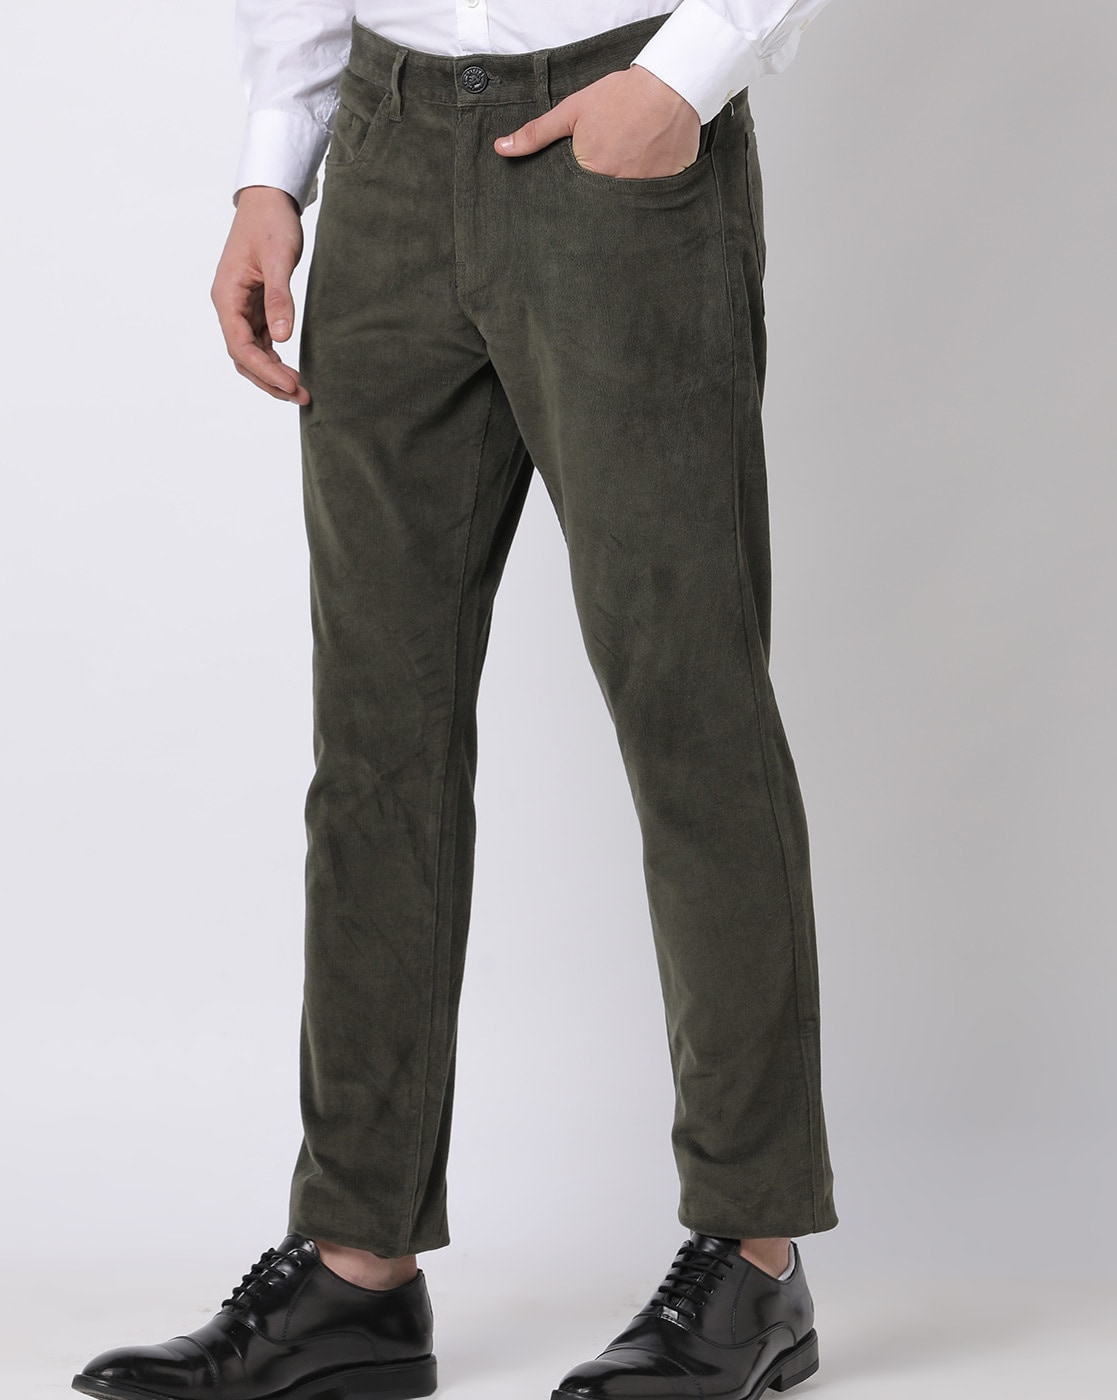 Monki cotton skinny cord trousers in dark green - ShopStyle